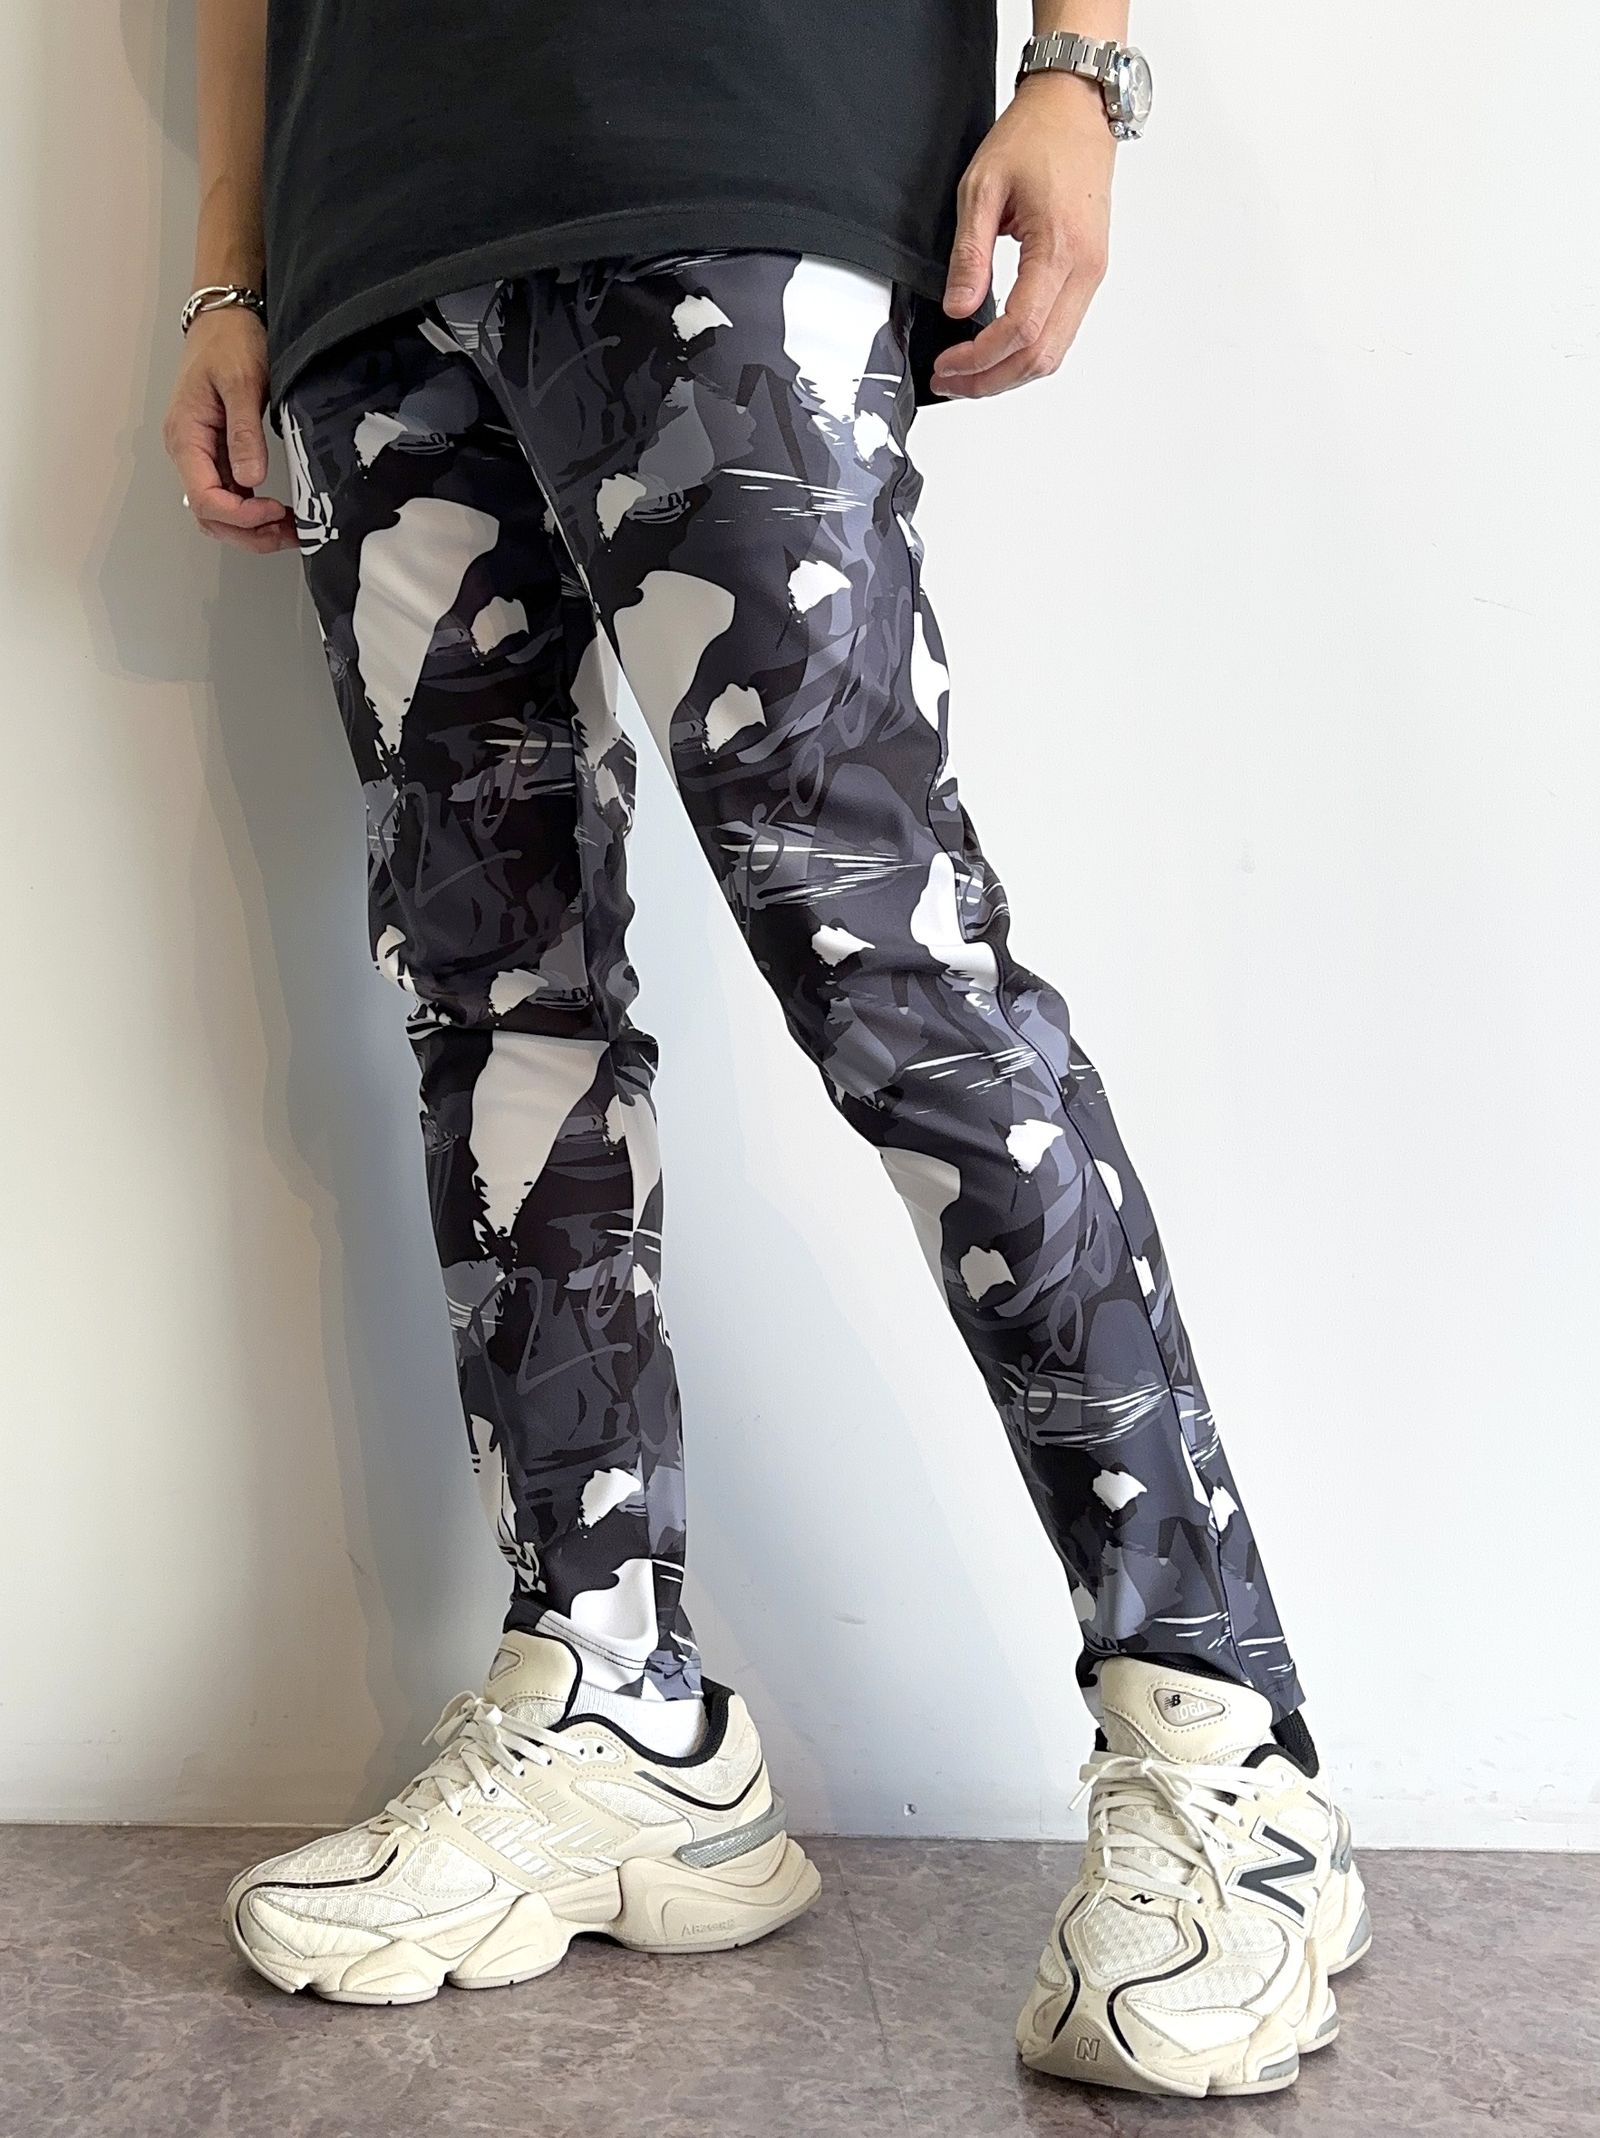 RESOUND CLOTHING - CHRIS EASY TUCK PANTS / RC29-ST-016T / カモ柄 ...